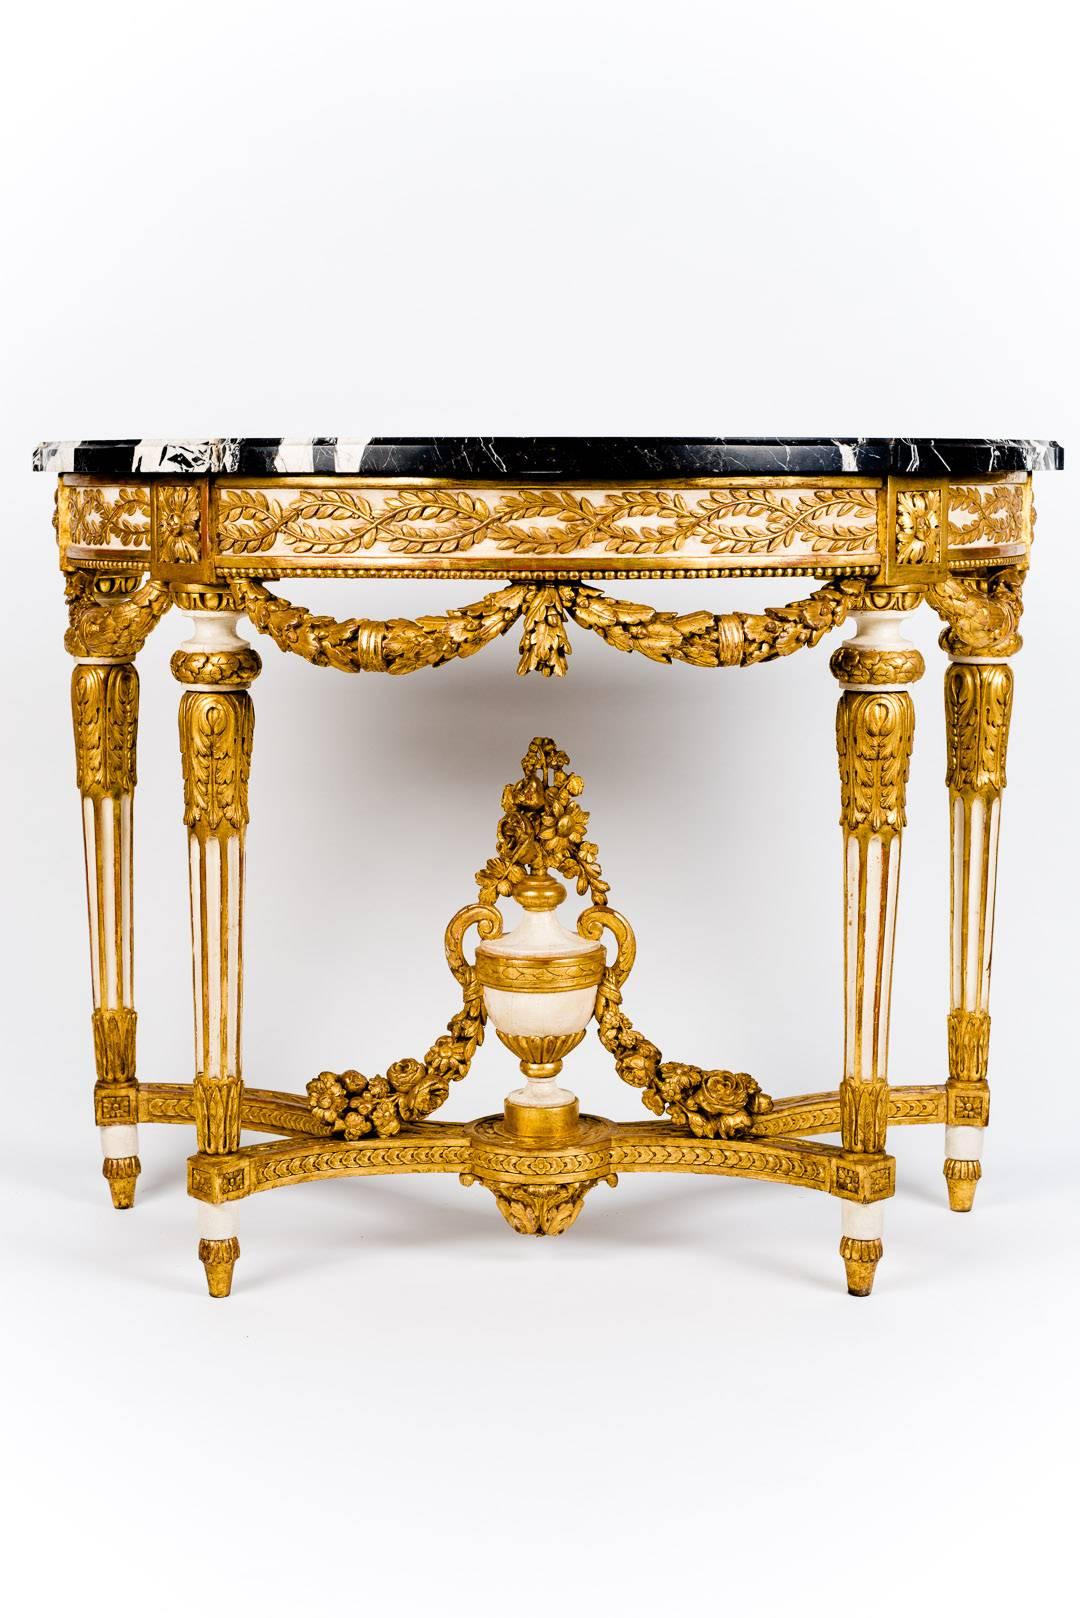 A very fine pair of Nord Italian Ivory painted and parcel-gilt console table, with a black and white 